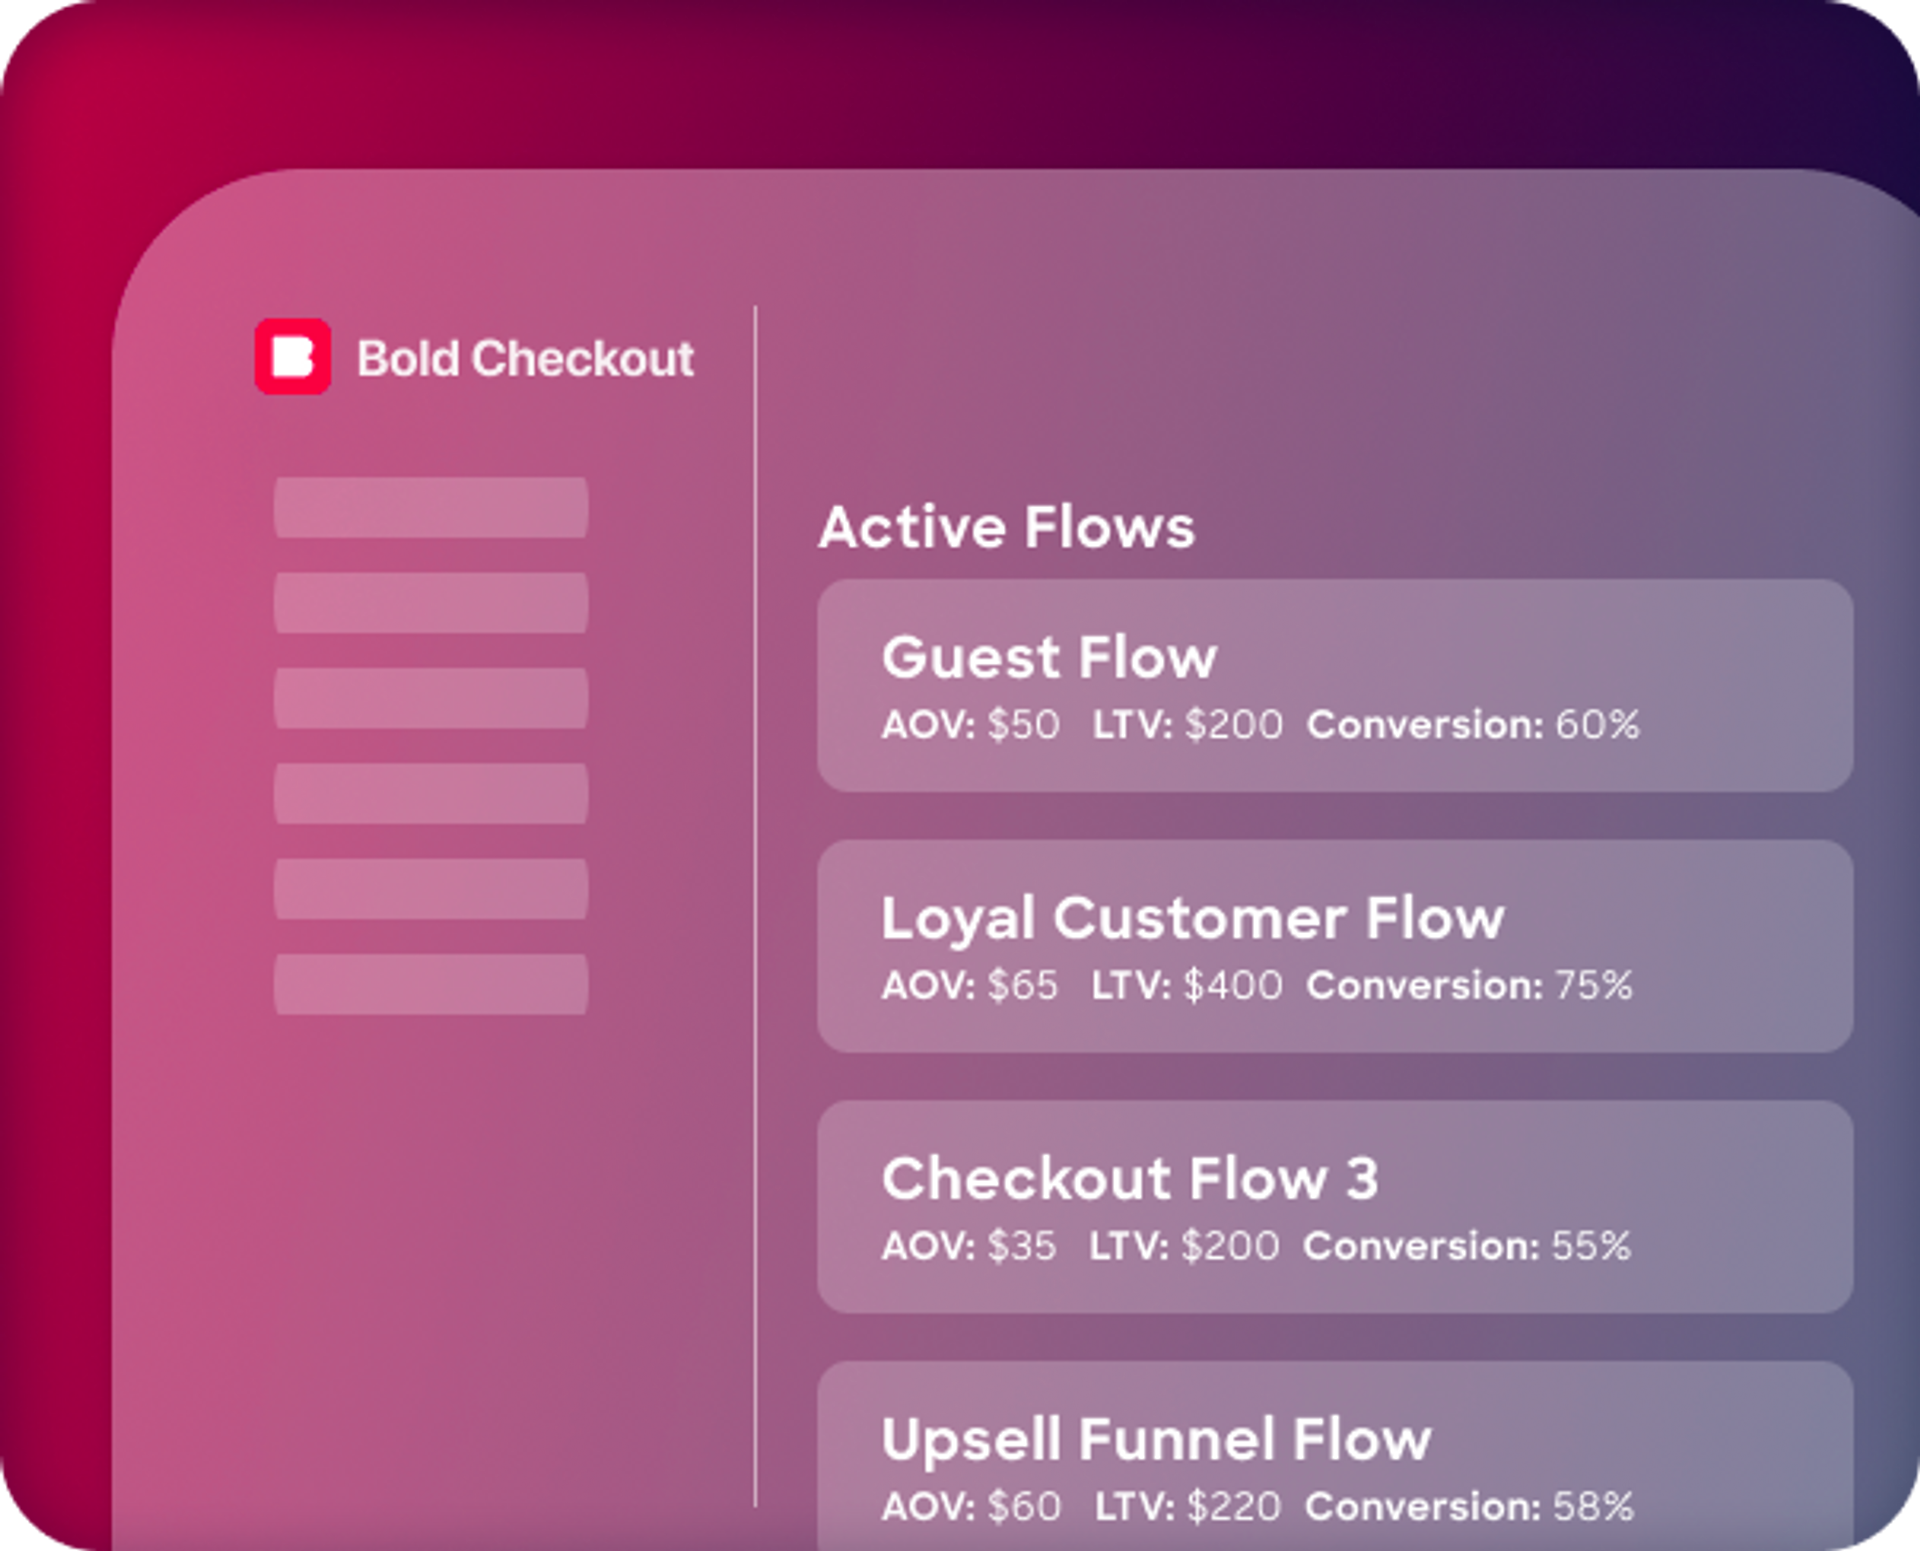 Bold Commerce checkout flows that display AOV, LTV, and Conversion